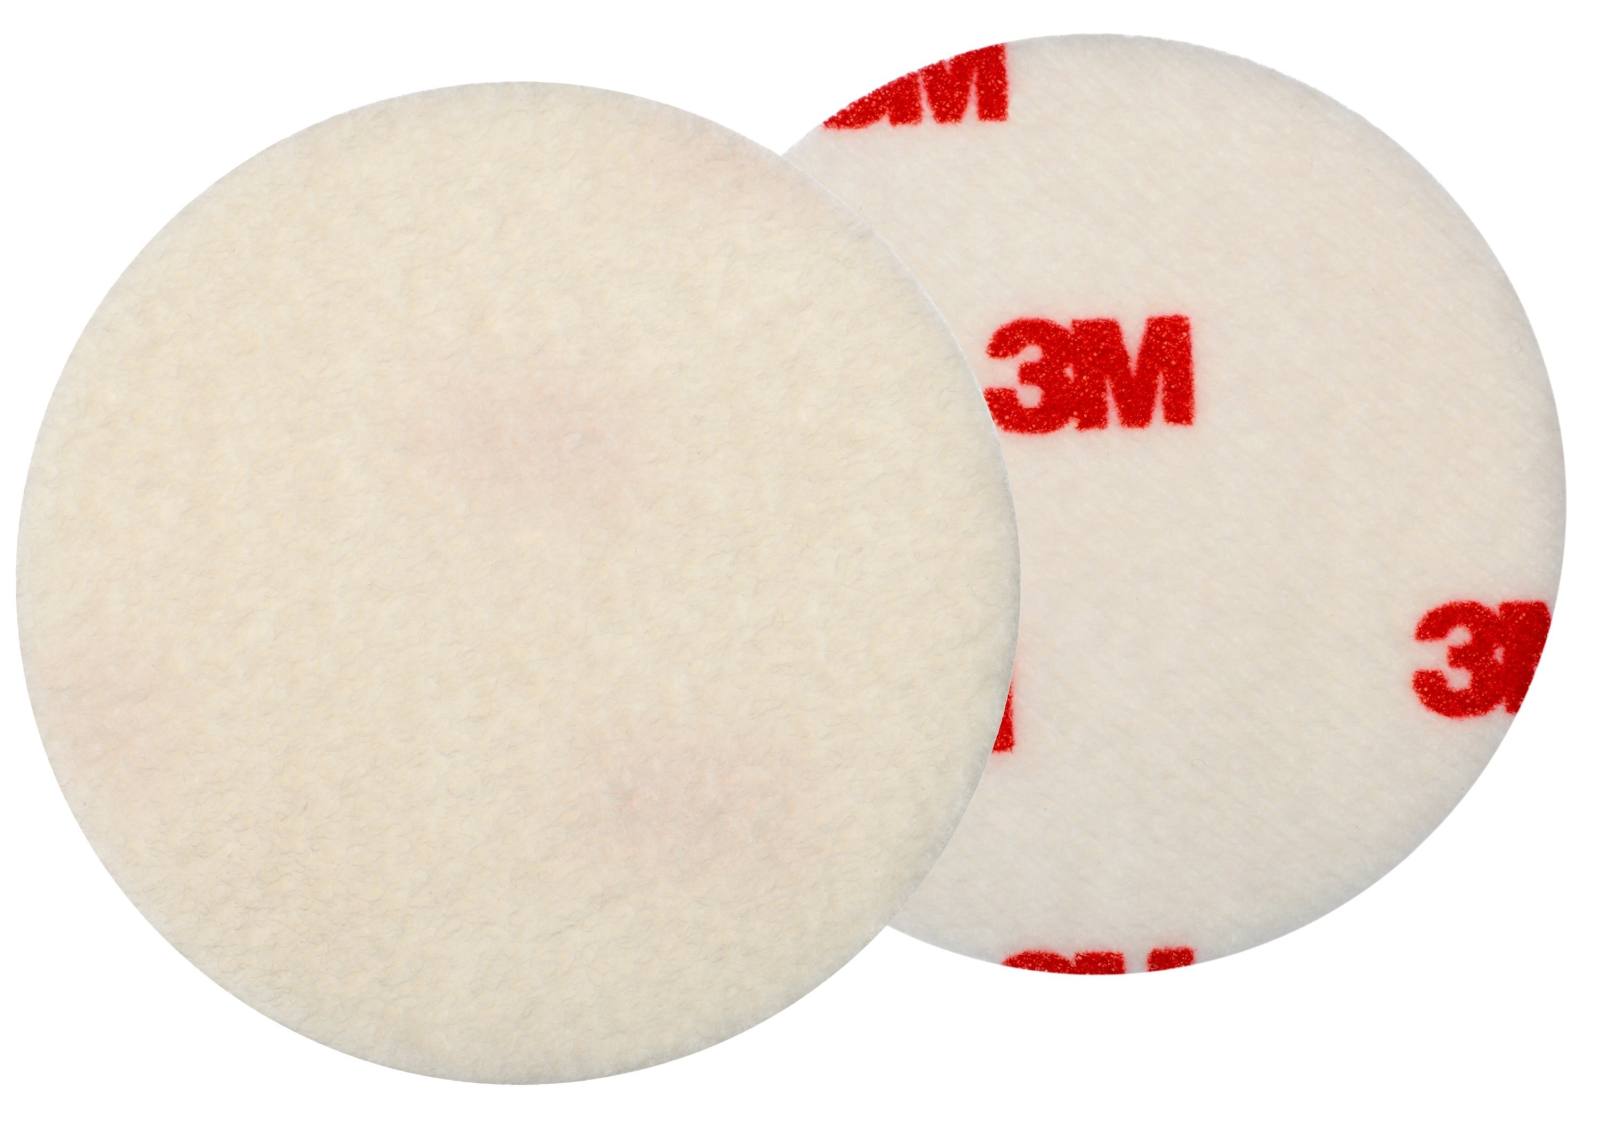 3M Finesse-it Polierscheibe, Buffing Pad, rot/weiß, 75 mm #50016